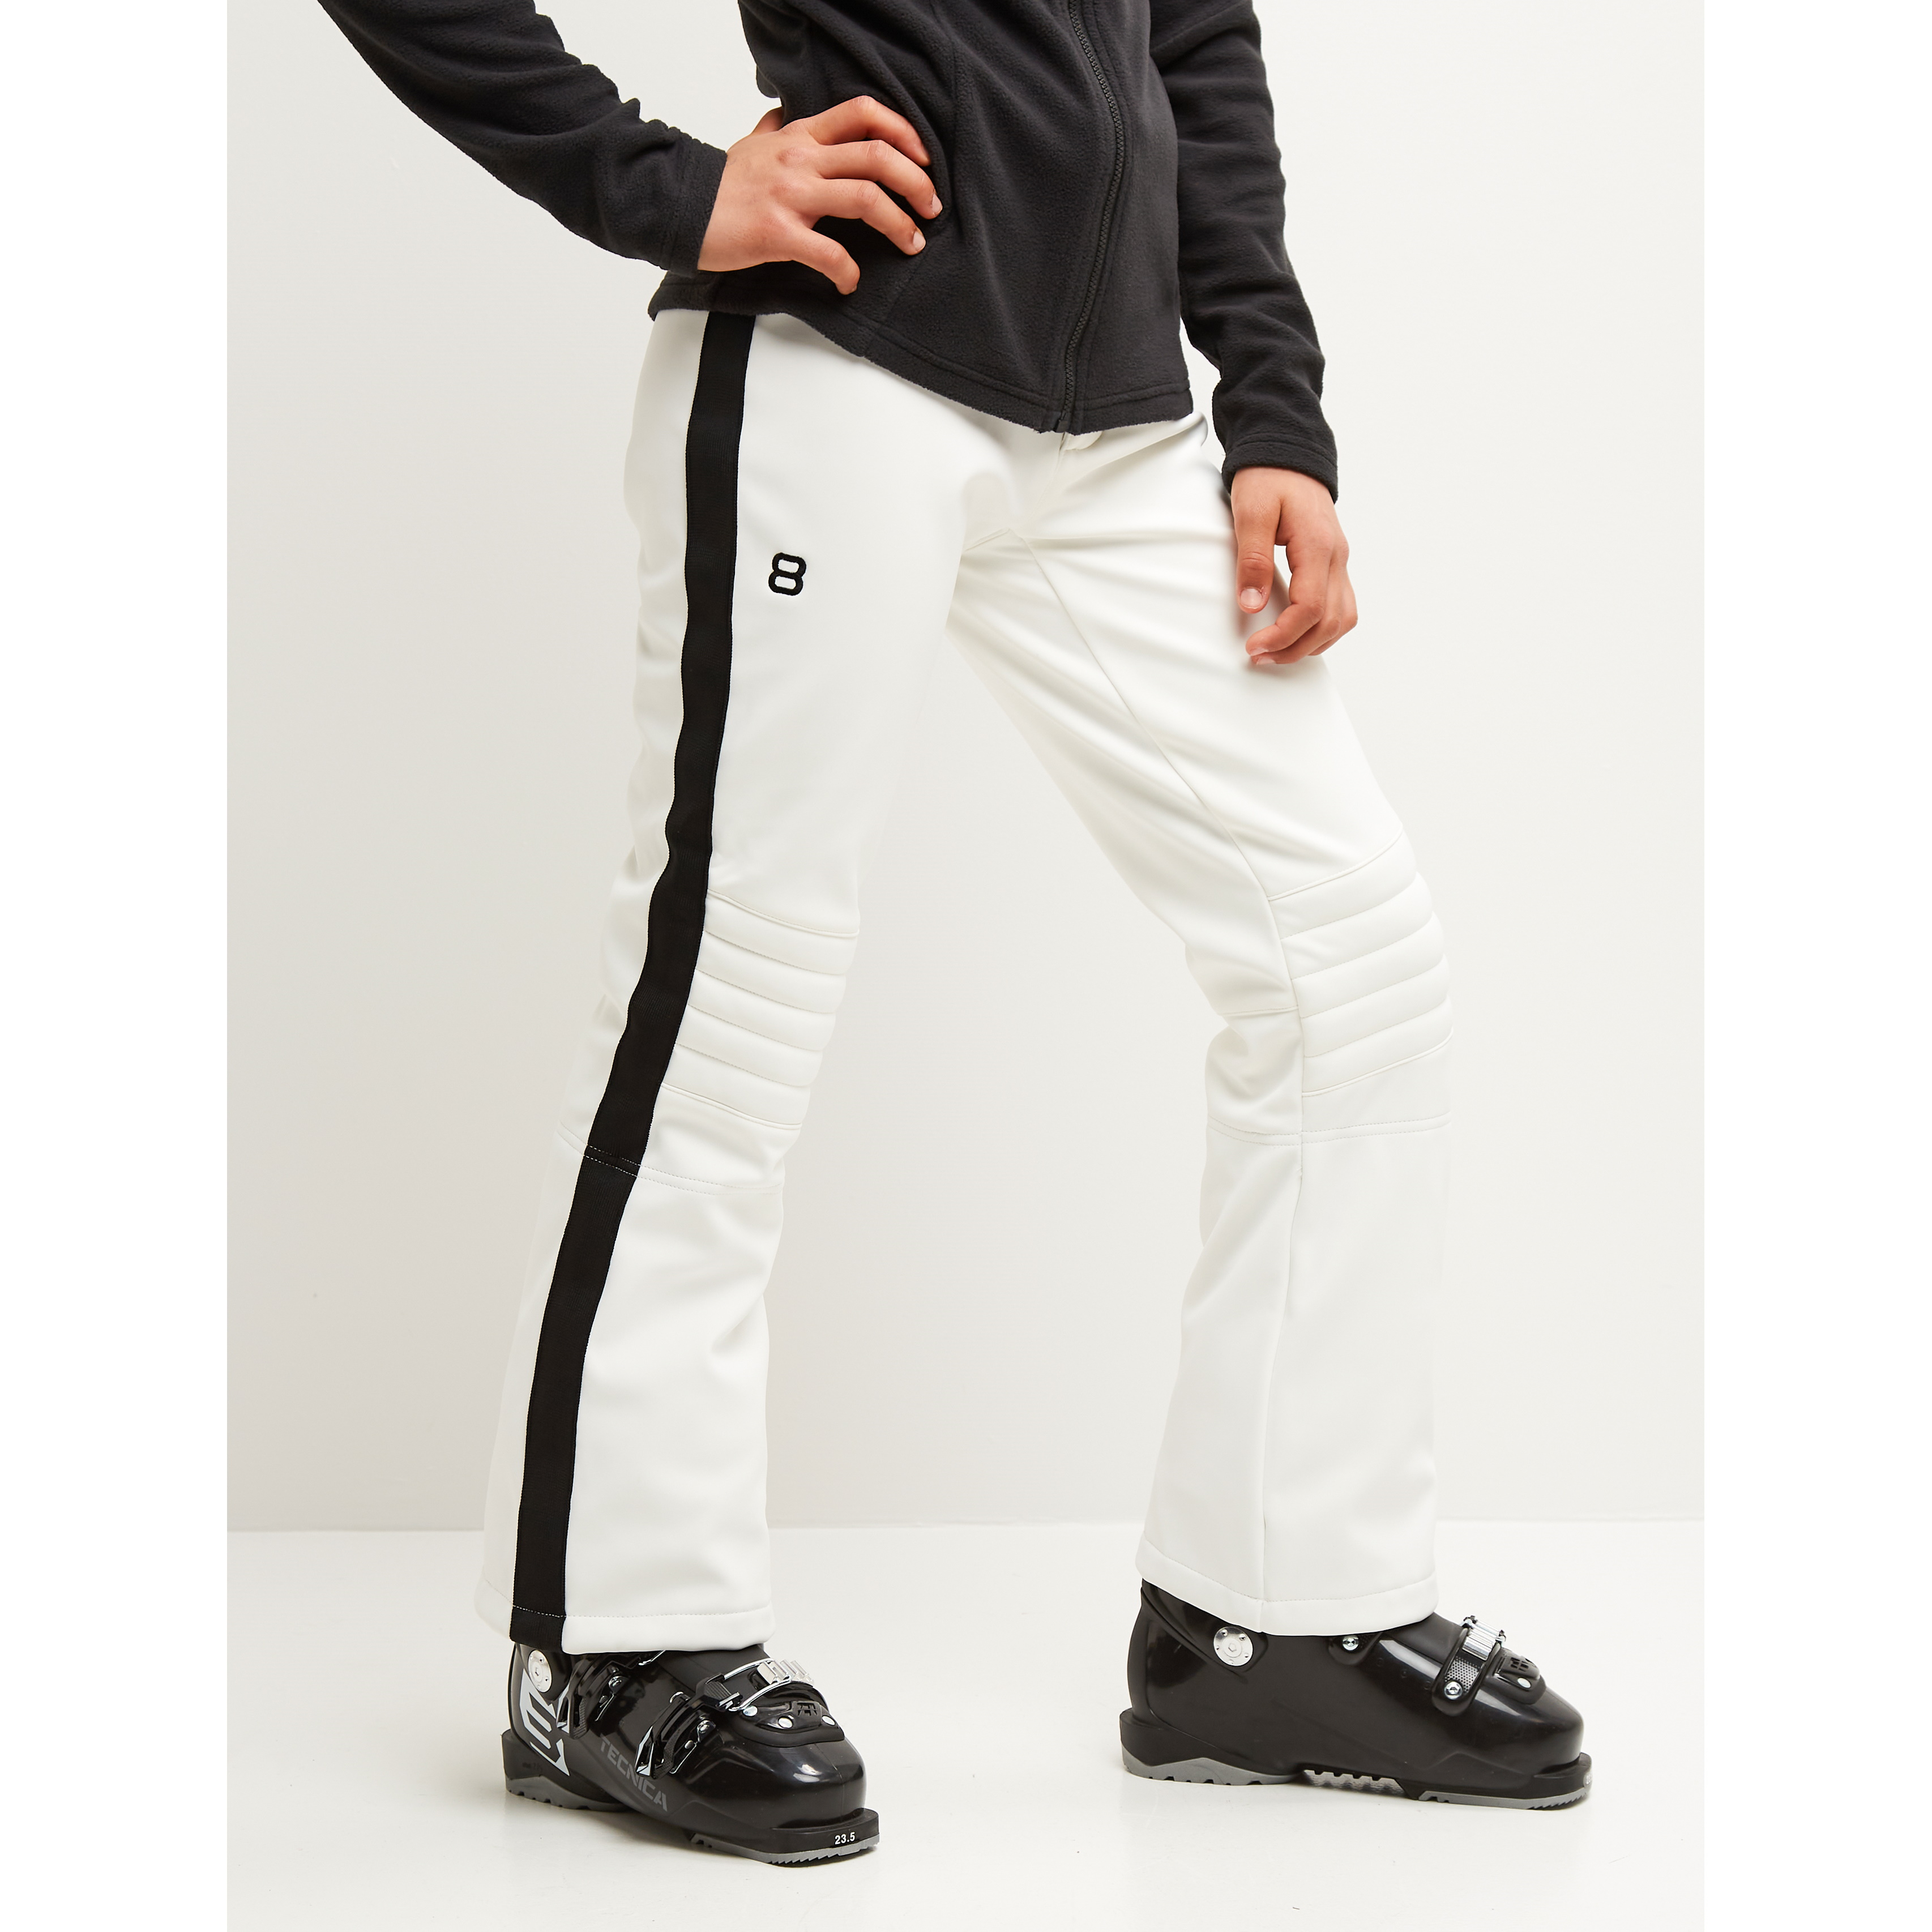 8848 Altitude Vice Pant, World Wide Shipping